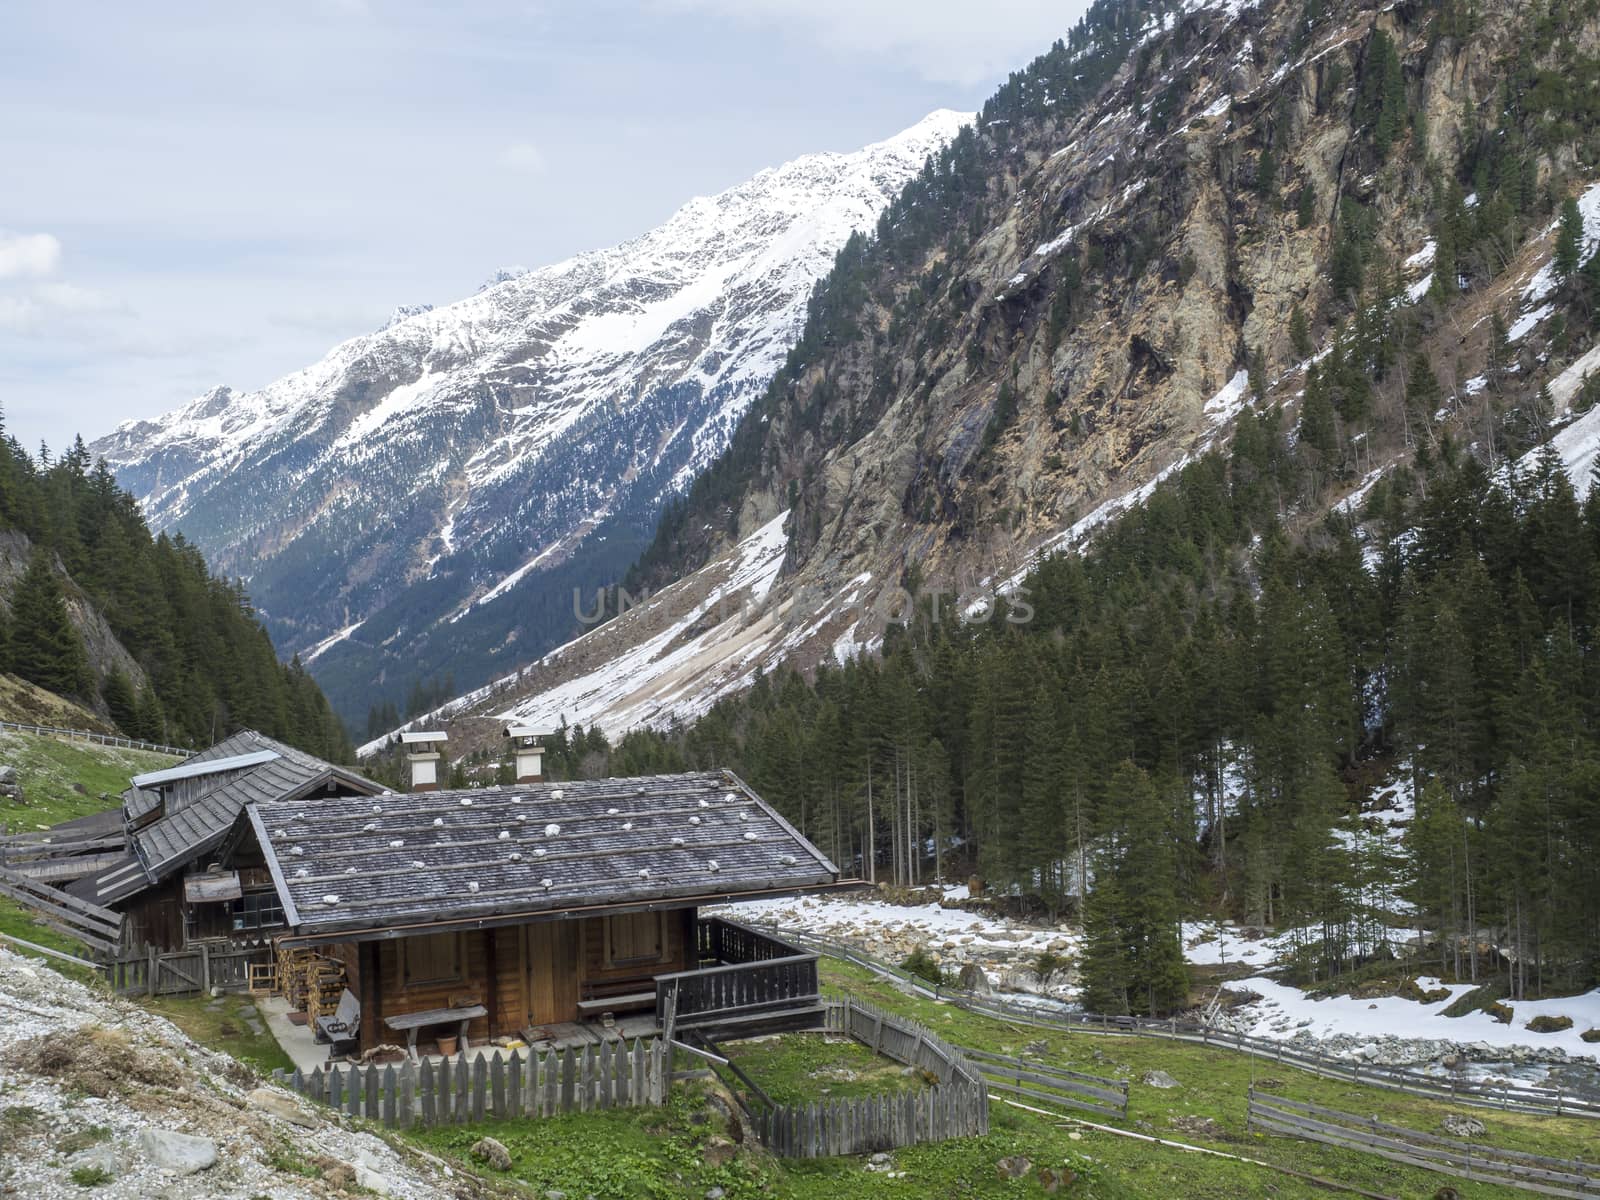 Alpine wooden cottage near GRAWA Glacier Waterfall situated in Stubai Valley, Tyrol, Austria. Spring mountain river and trees landscape natural environment. Hiking in the alps